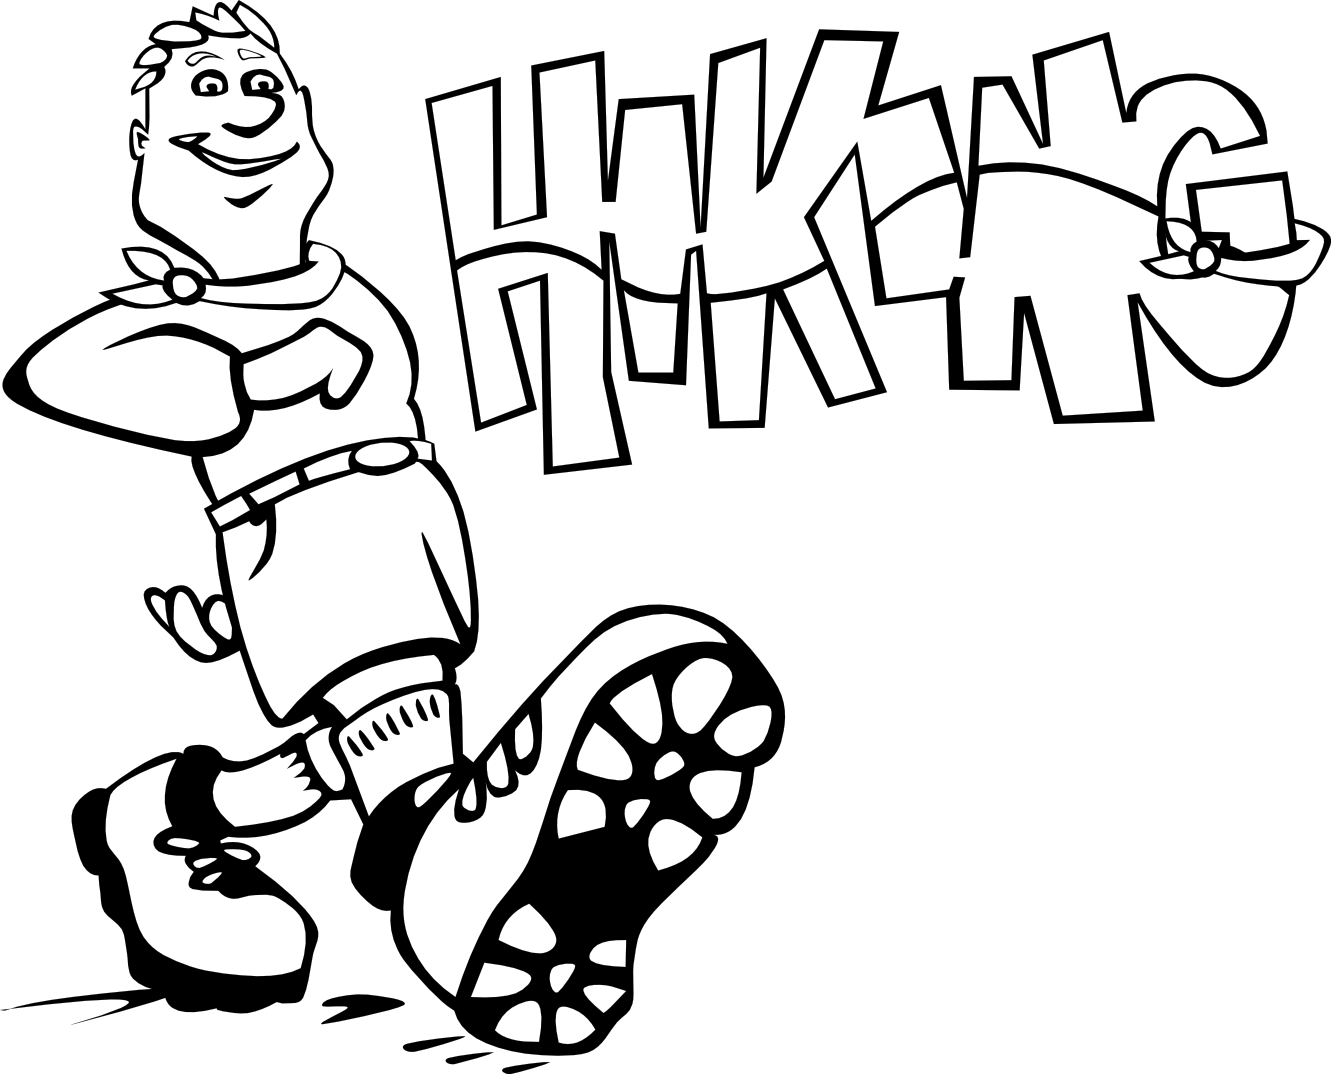 Hiking Clipart Black And White | Clipart Panda - Free Clipart Images